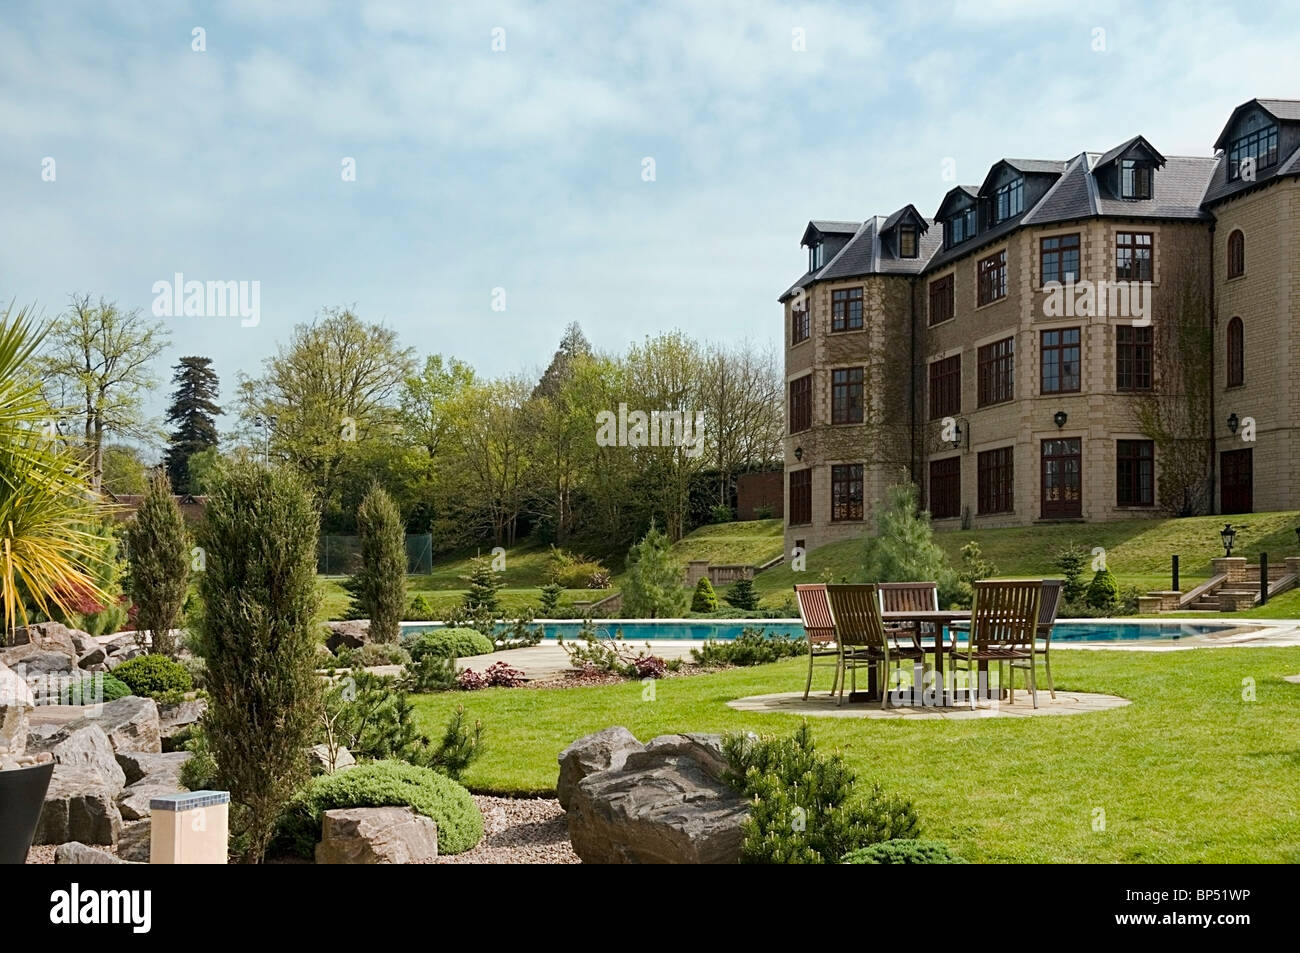 Garden view of Pennyhill Park Luxury Hotel & Spa, exterior grounds architecture, Bagshot, Surrey, England, UK, GB, Europe, EU Stock Photo